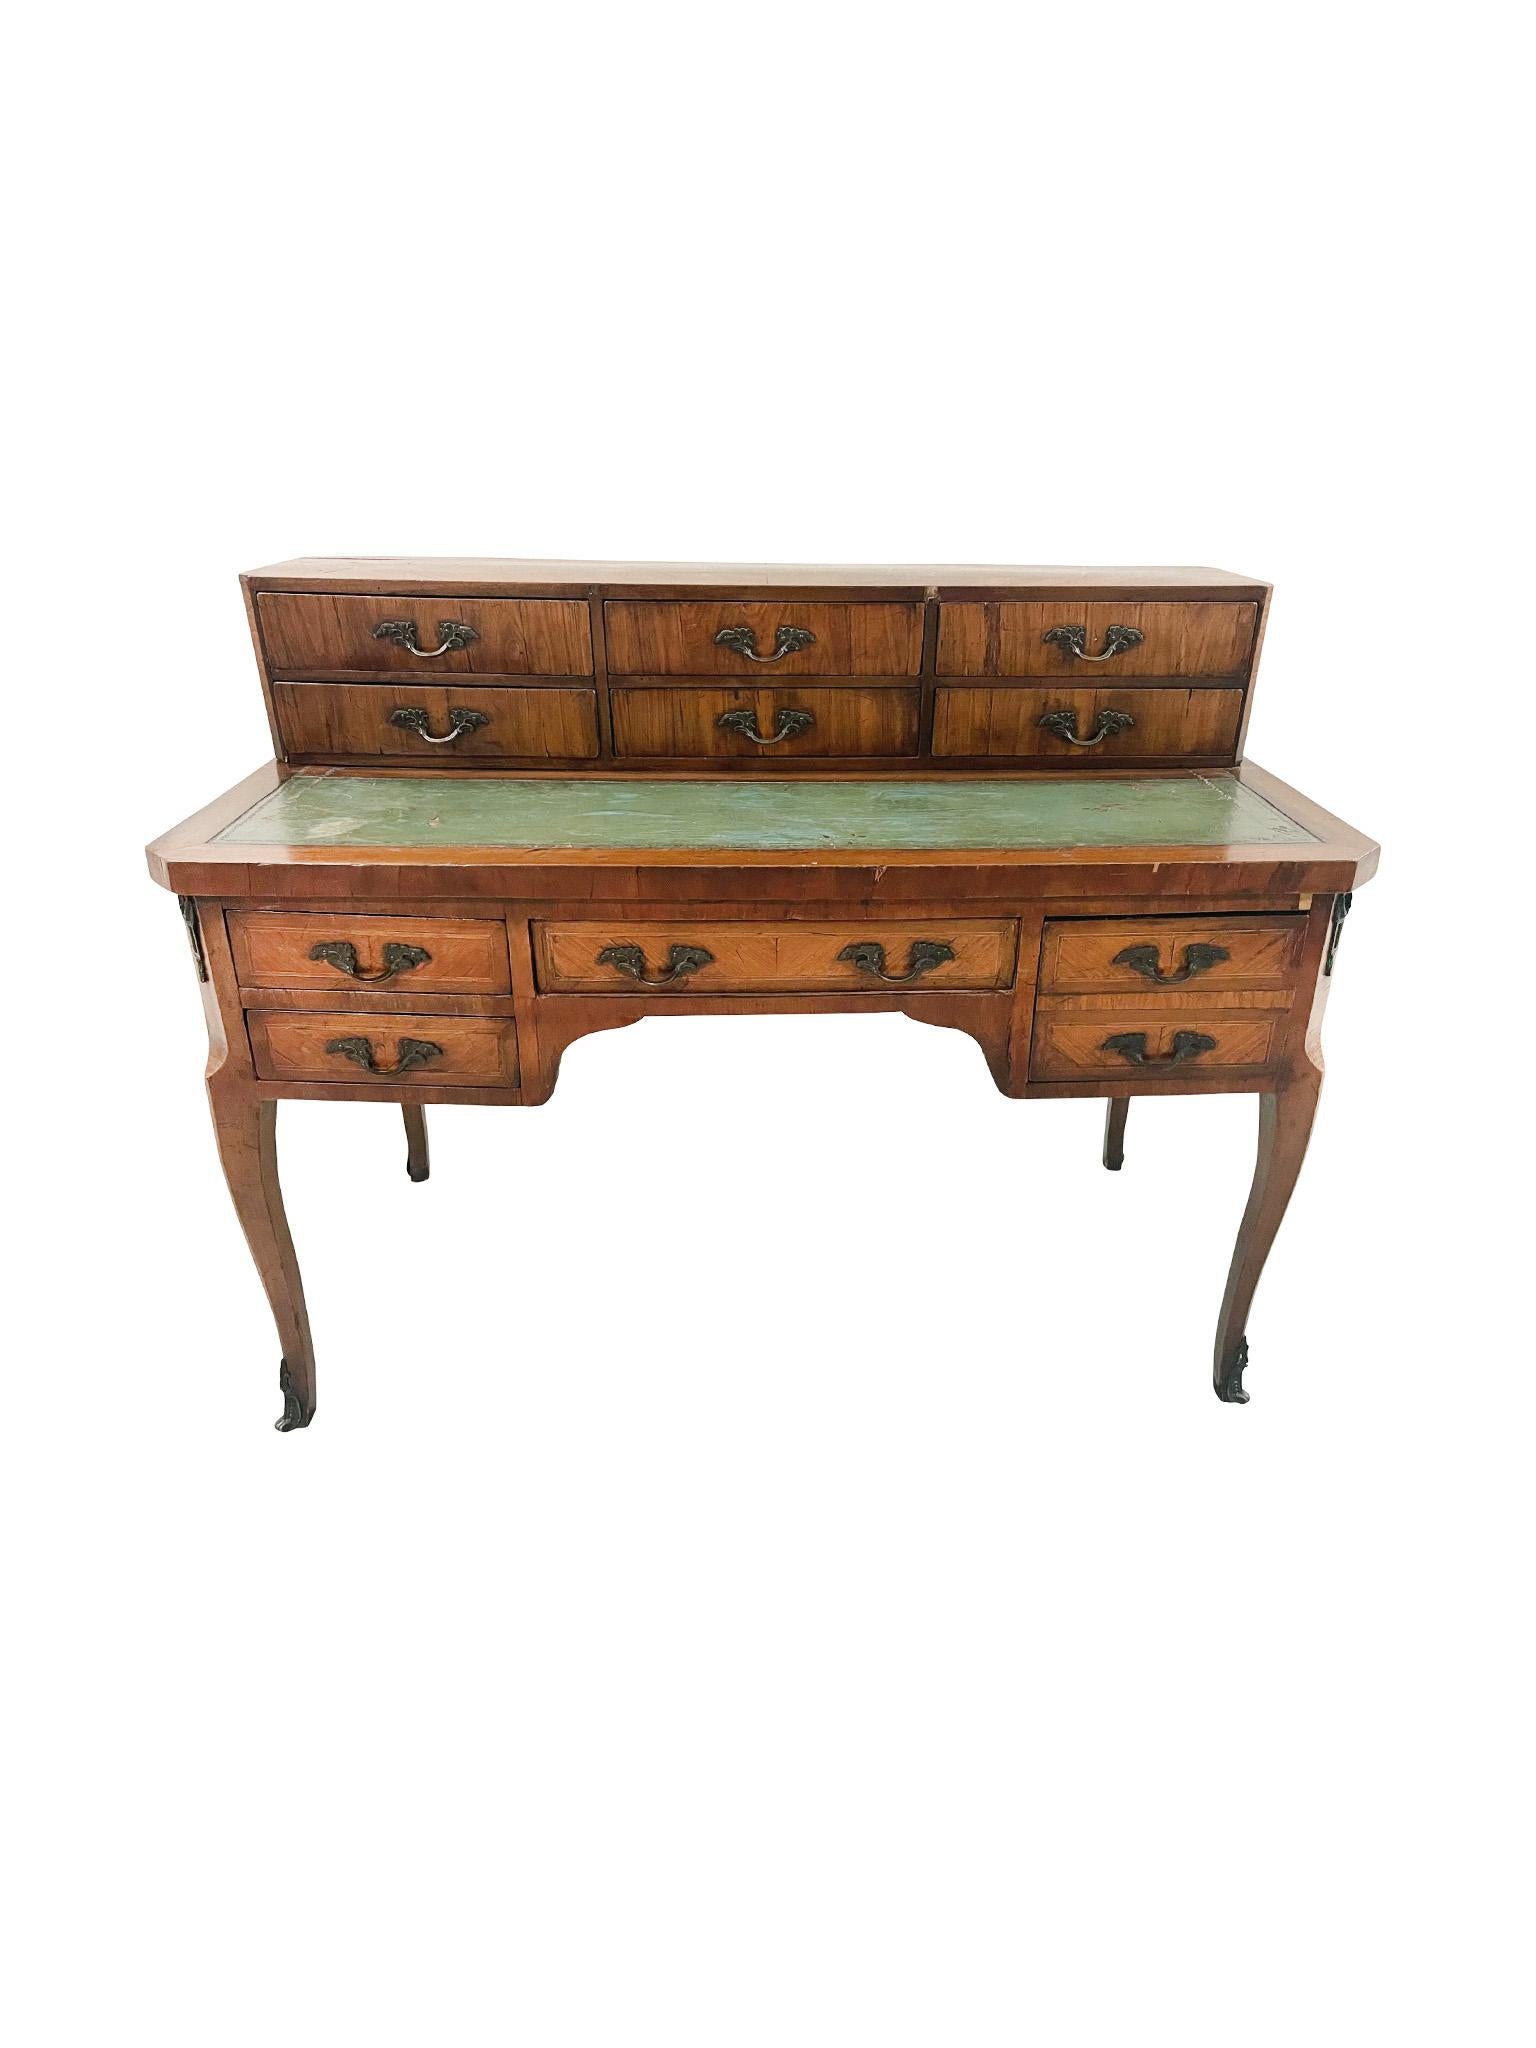 Hand-crafted in the 19th Century, this Louis XV-style desk is comprised of rosewood with decorative veneer, green leather top, and bronze mounts and pulls. The flat-top cabinet consists of 6 small drawers. The desk is equipped with a central drawer